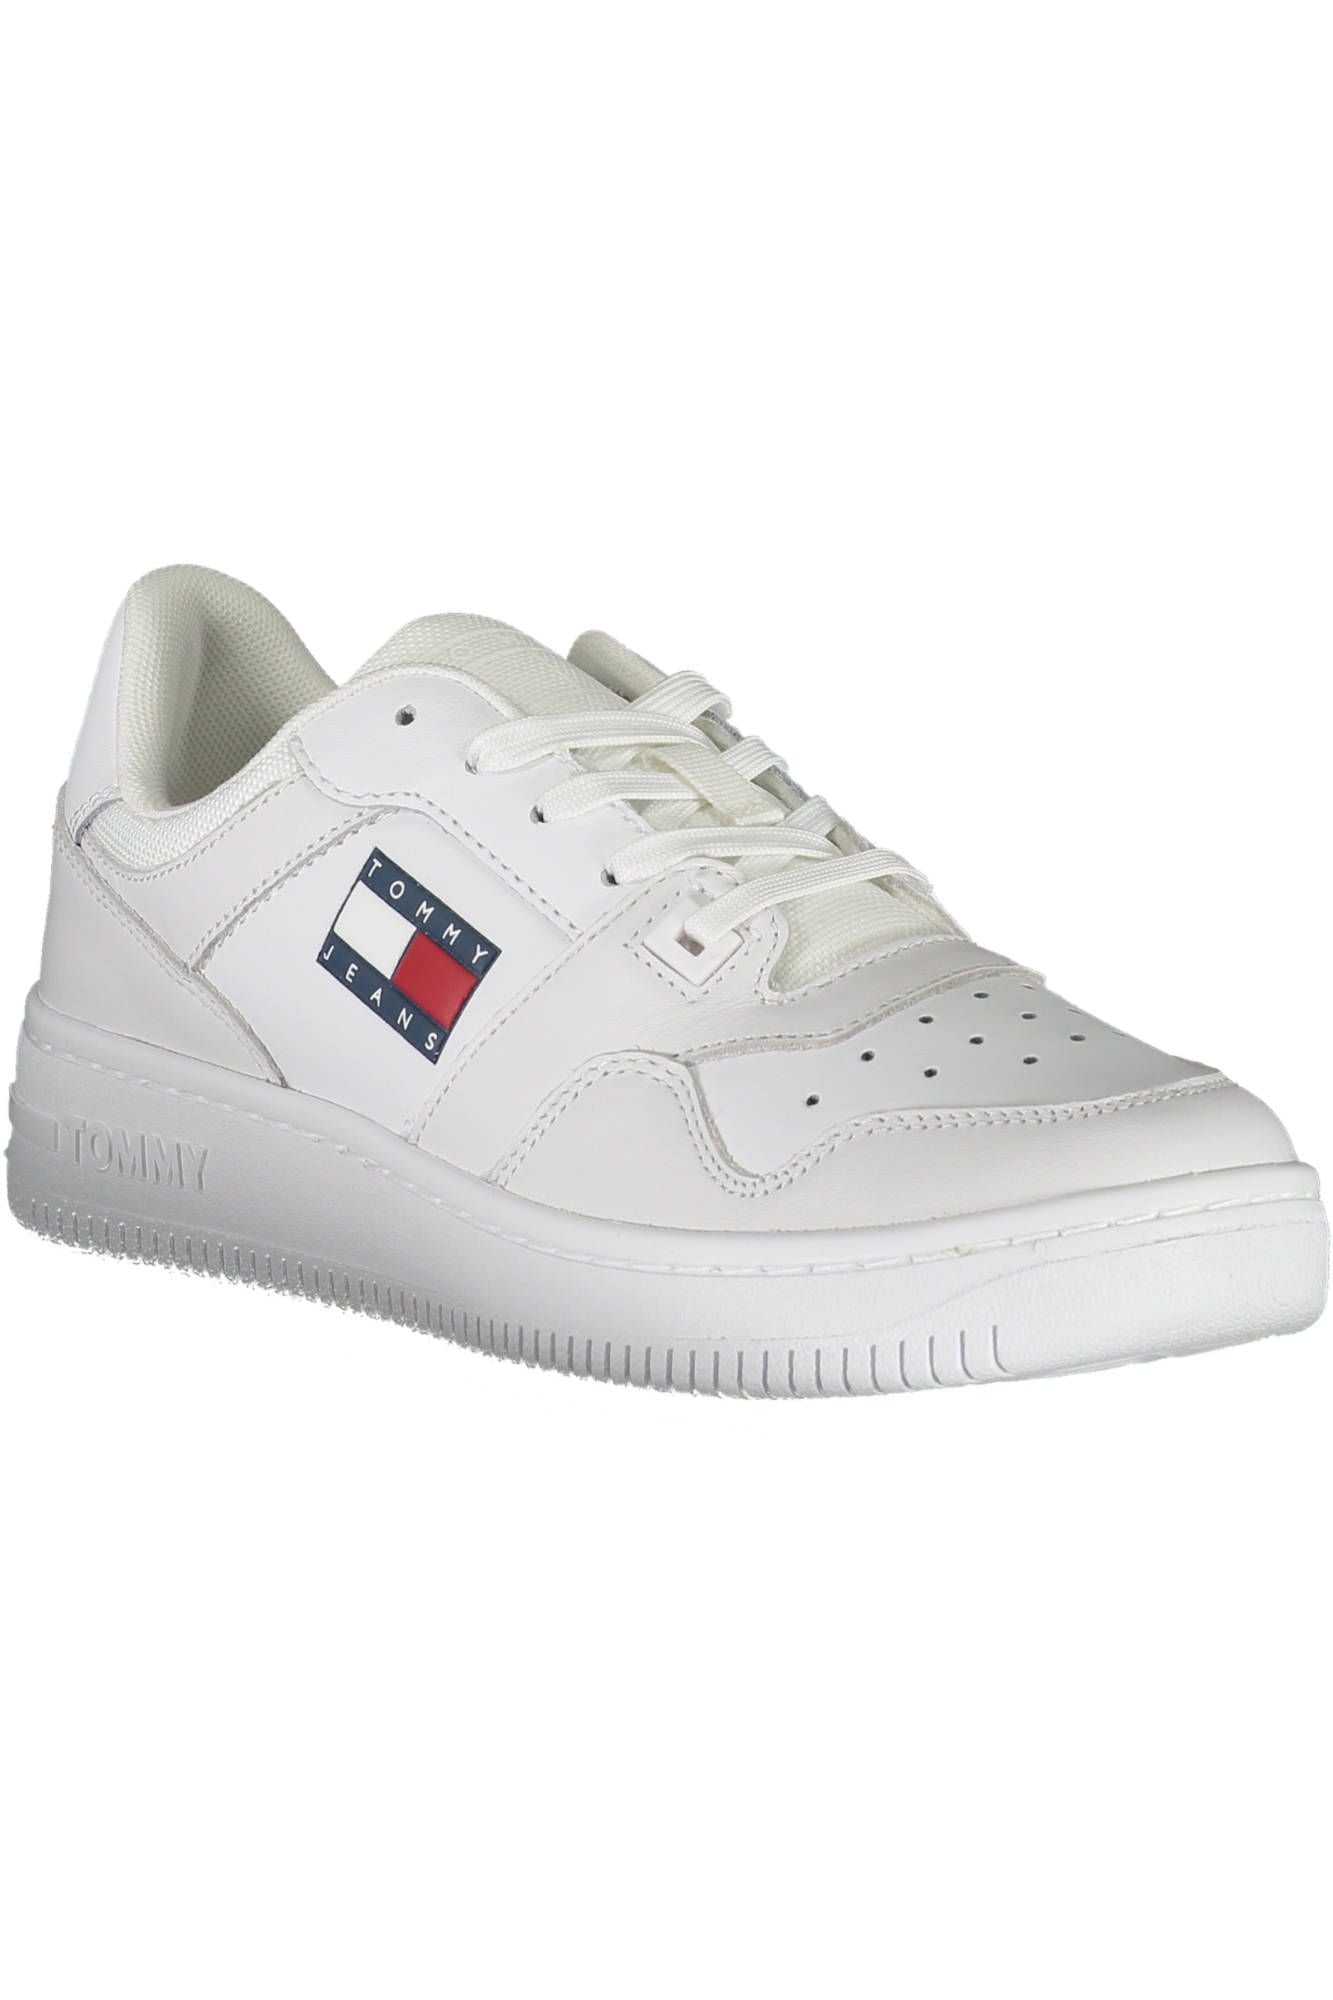 Tommy Hilfiger Sleek White Sneakers with Eco-Friendly Twist